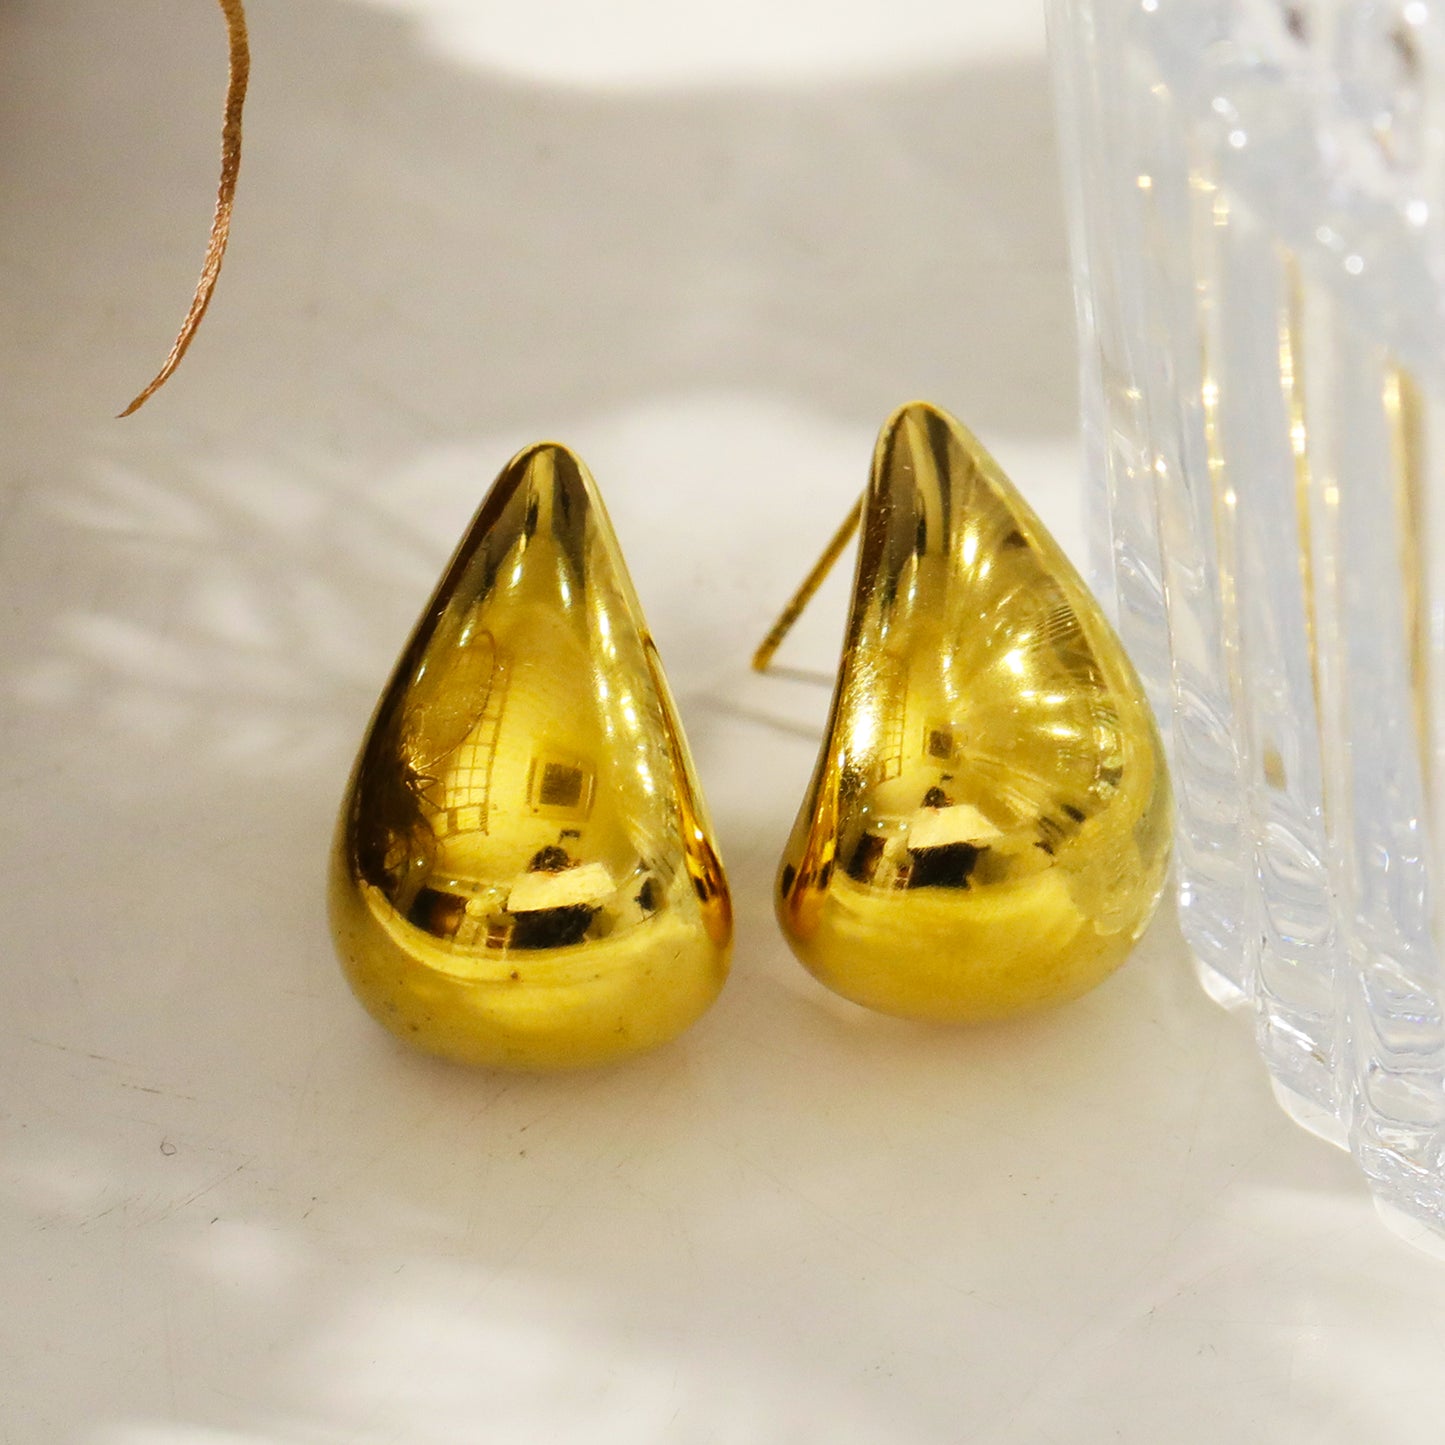 FORIA: Chunky Look Light Weight Tear Drop Stud Earrings - Statement of Confidence